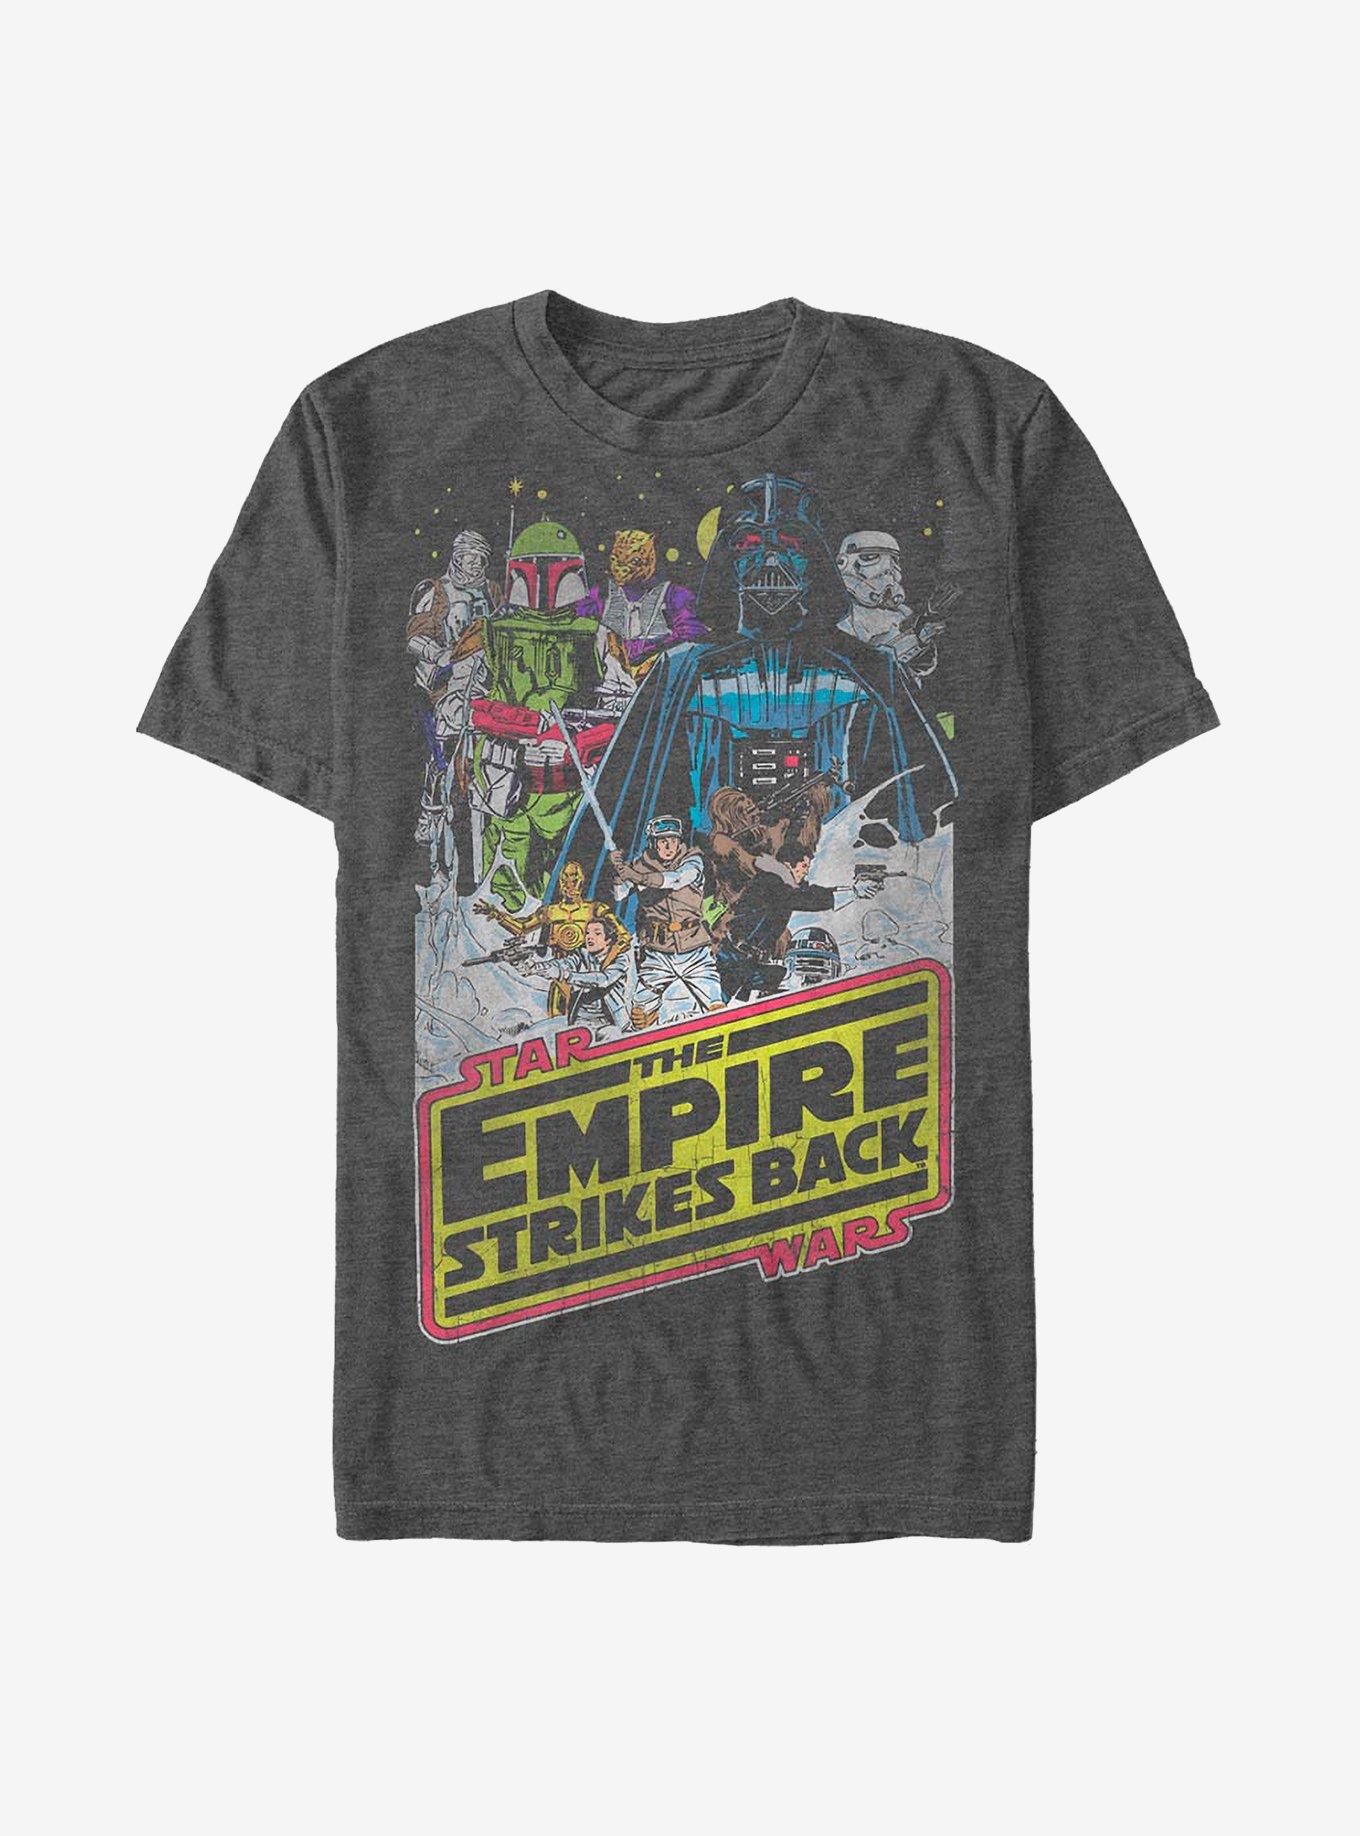 Star Wars The Empires Strikes Back Hoth T-Shirt